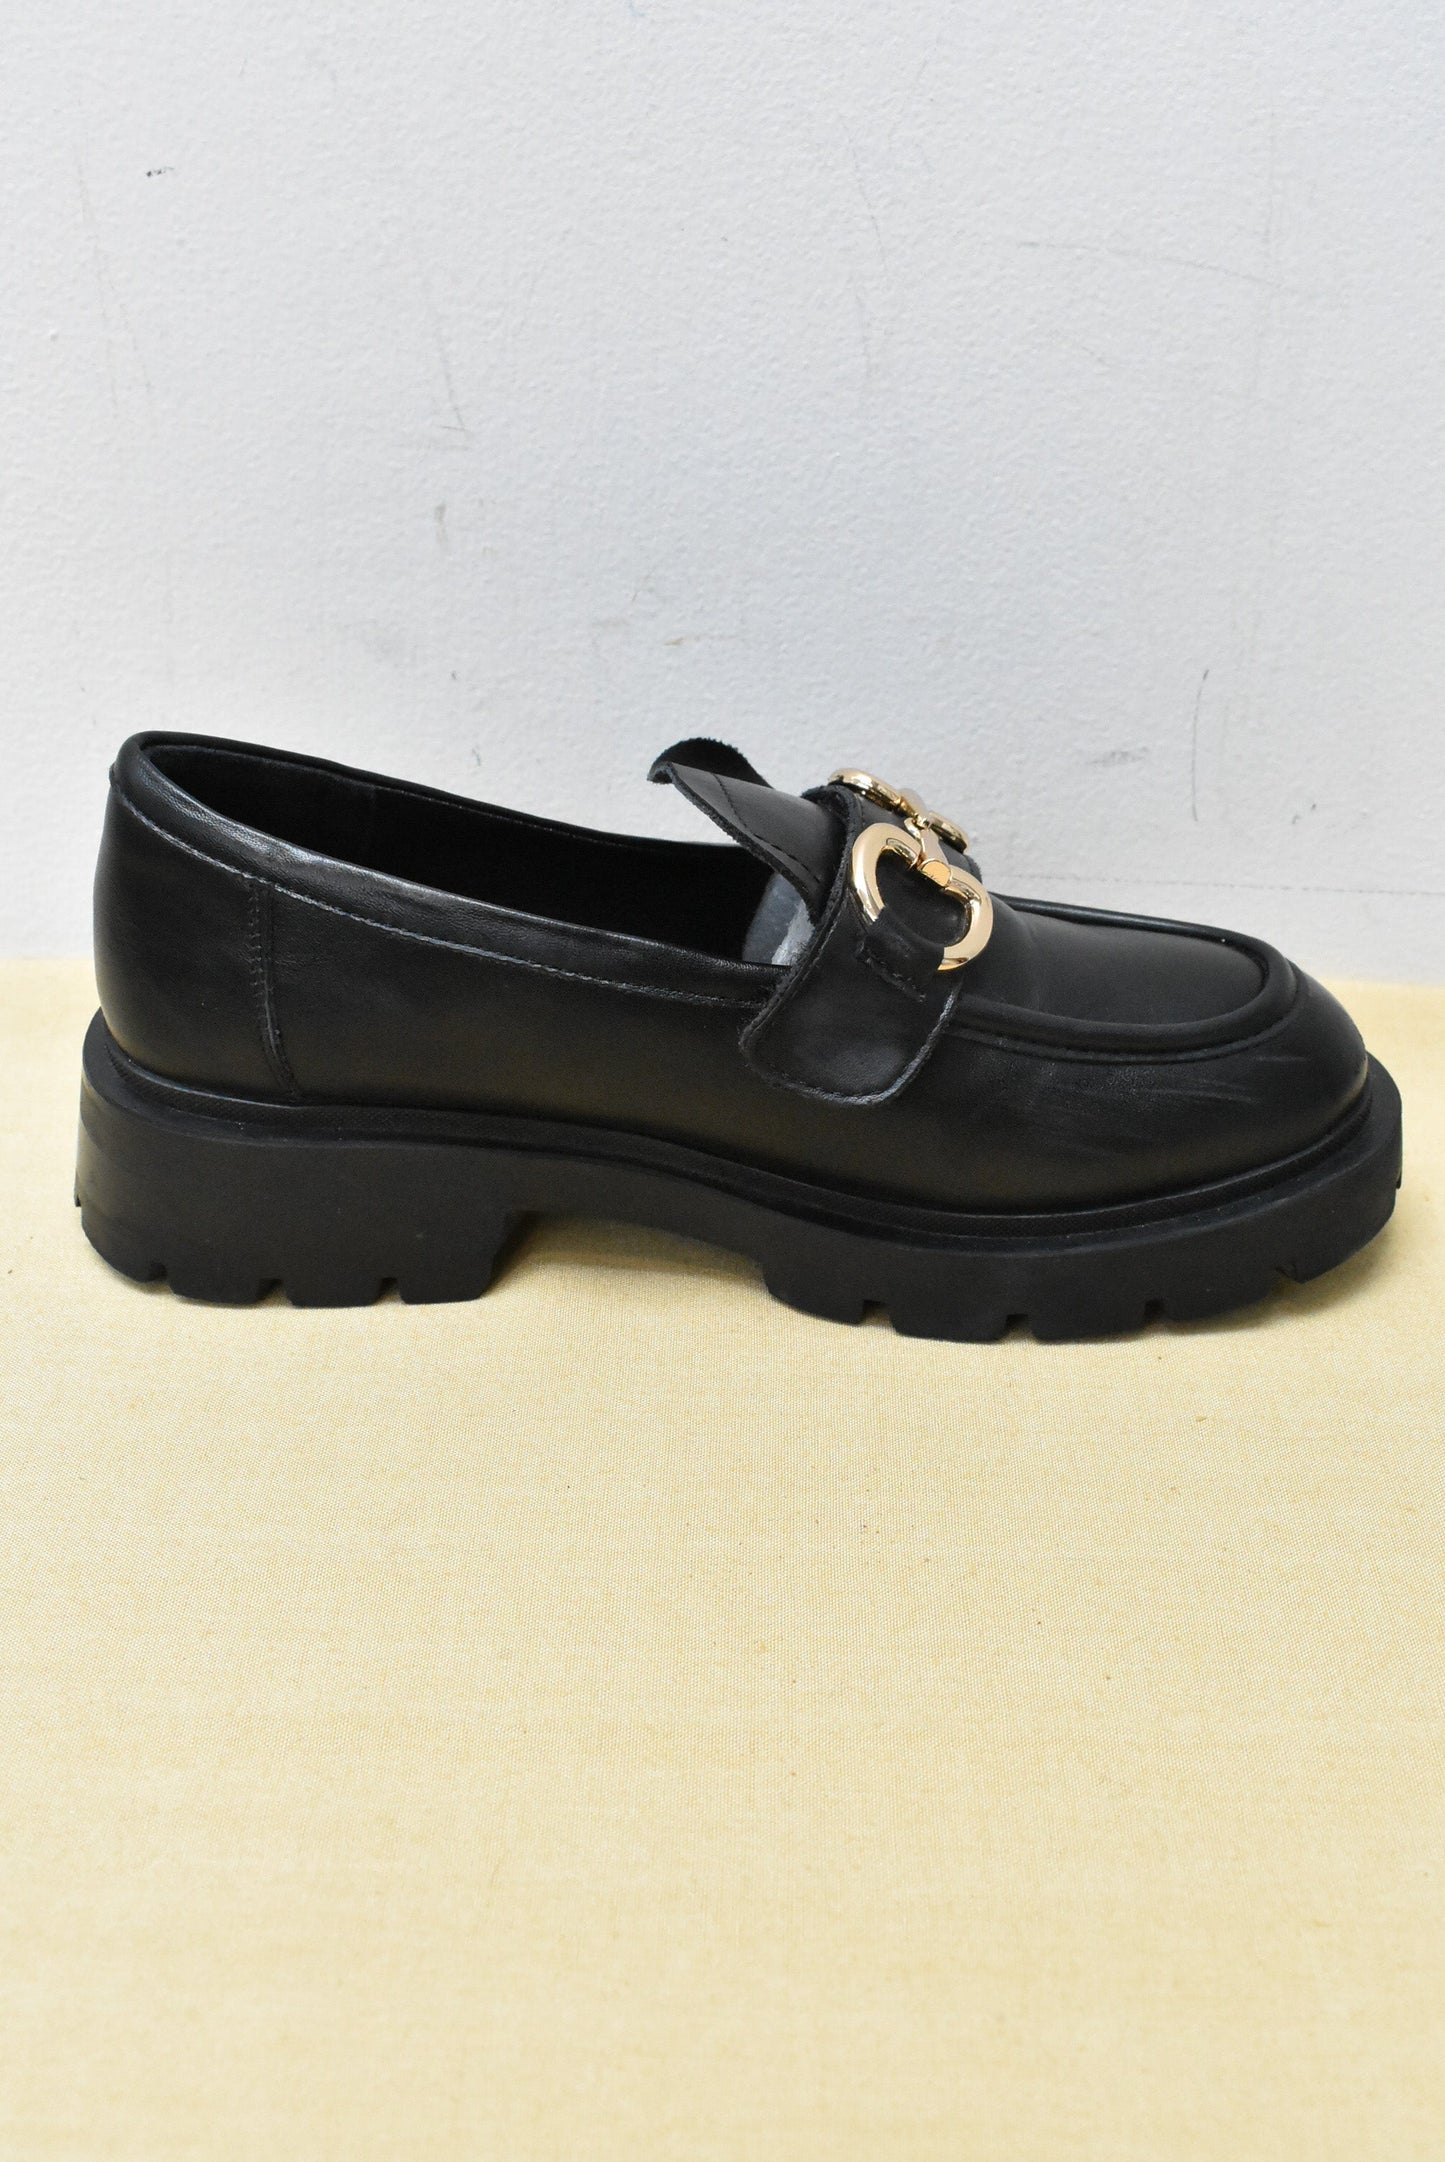 Daphne Black Loafers with gold hardware, 5.5